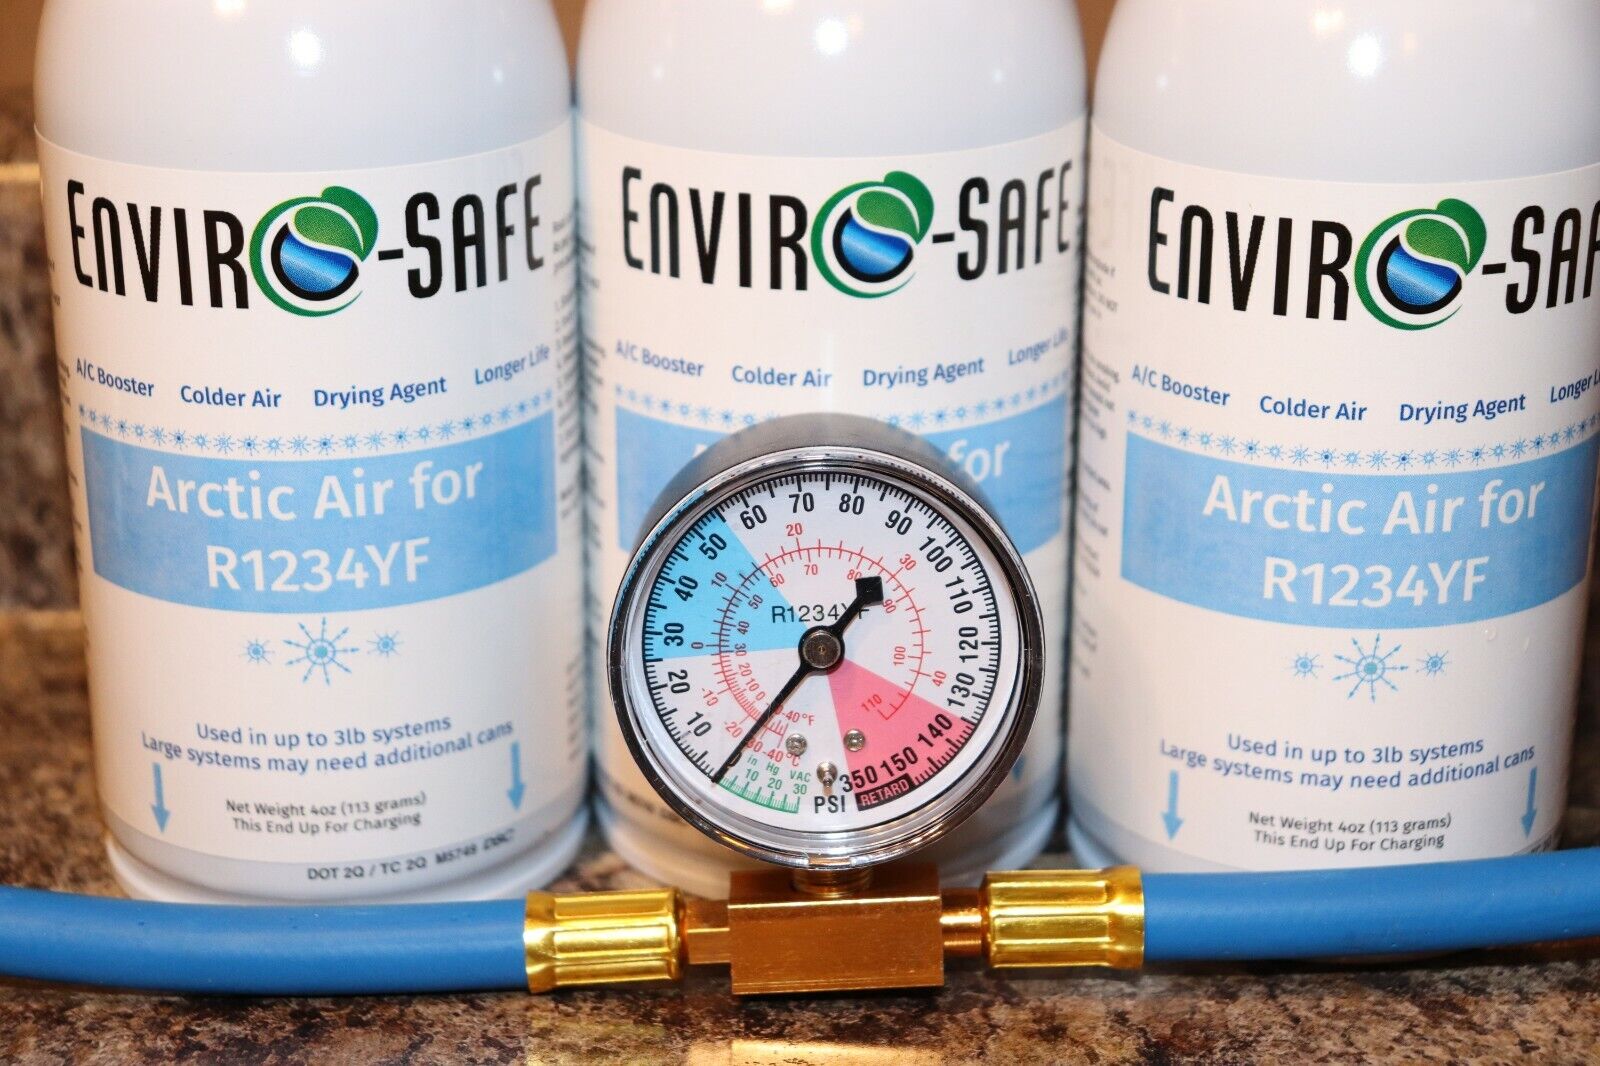 Arctic Air for R1234yf, 3 cans with Gauge, COLDER AIR, Enviro-Safe